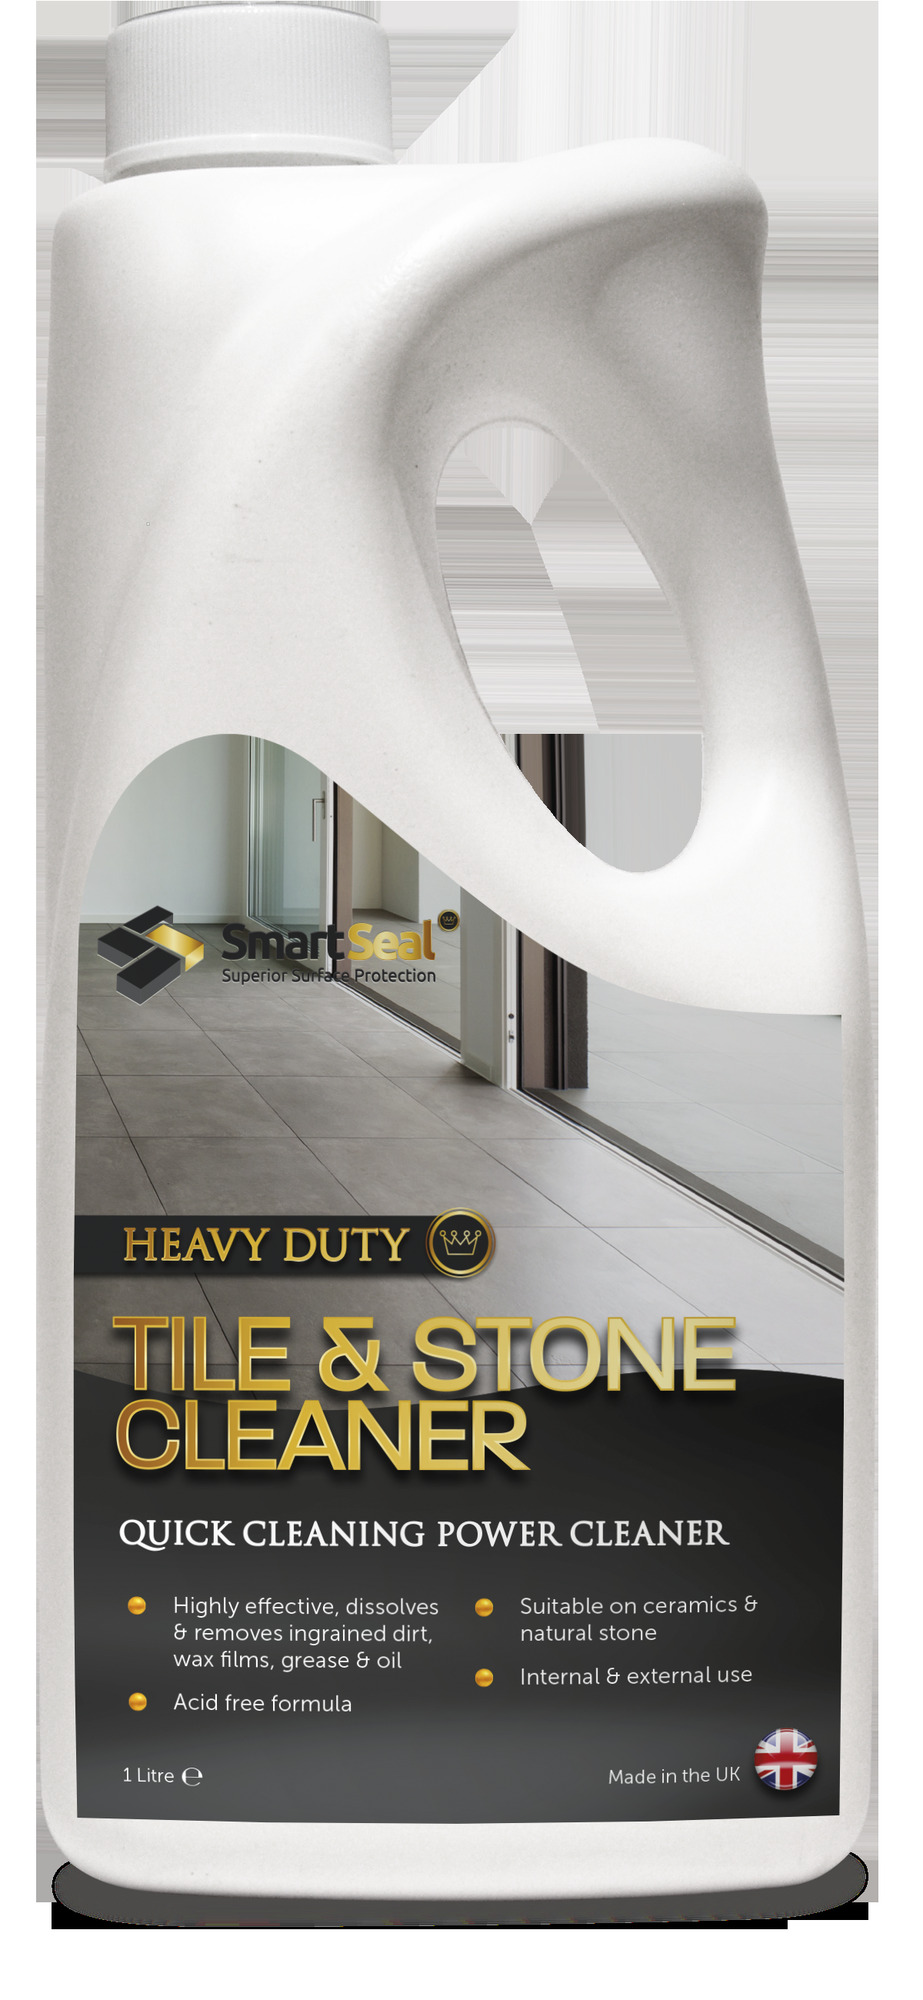 Heavy Duty Tile Stone Cleaner, How To Use Dupont Heavy Duty Tile And Grout Cleaner